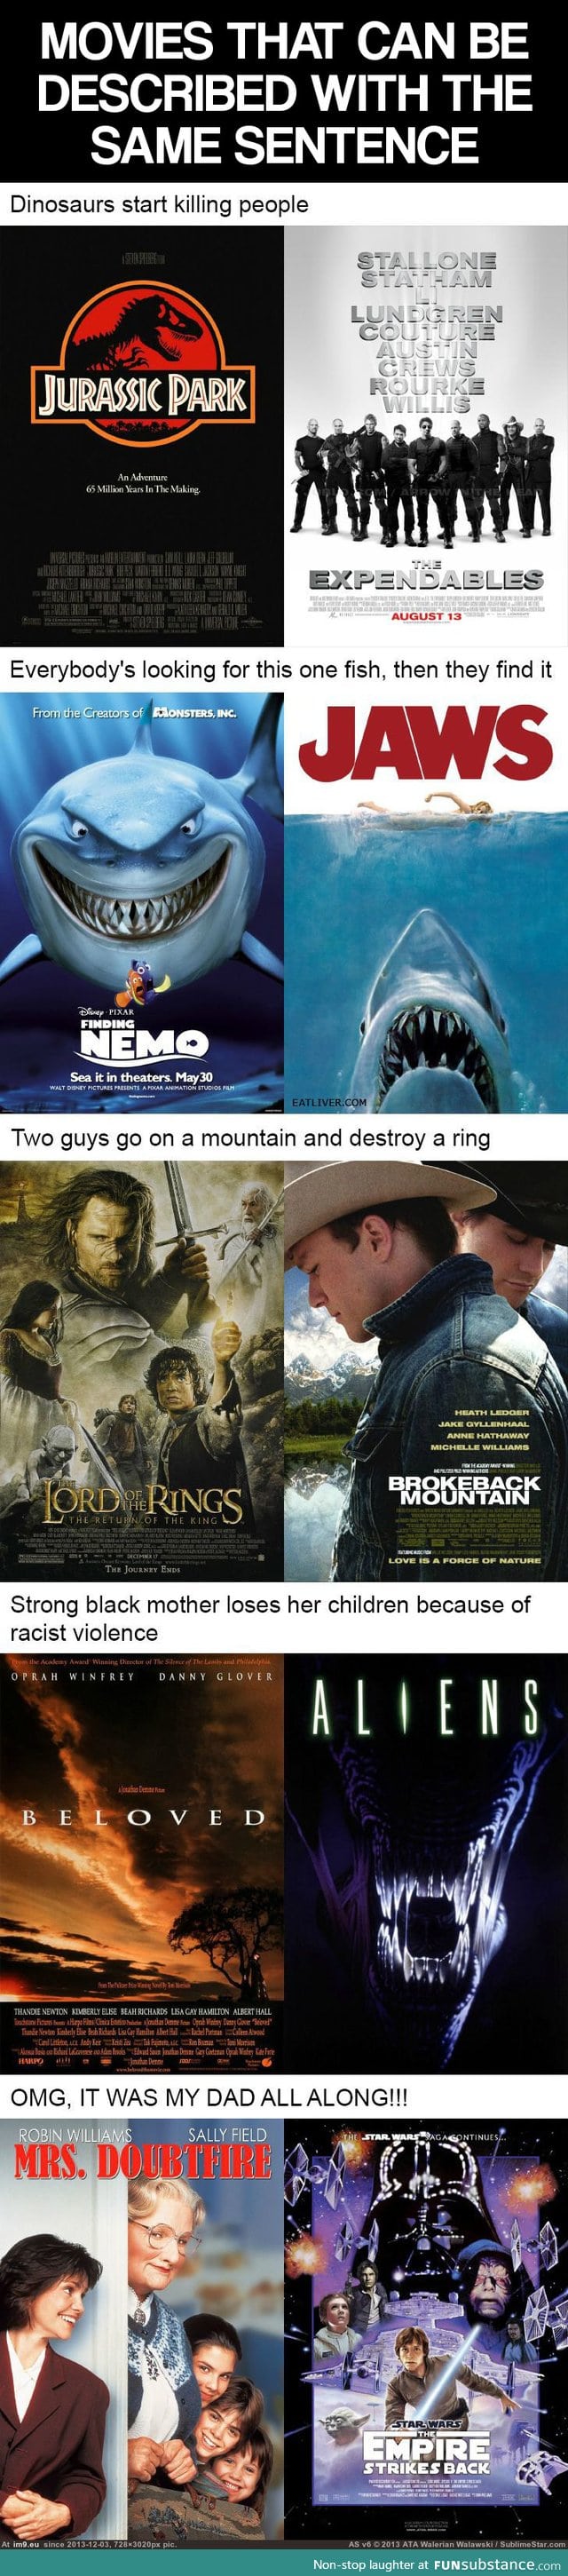 Two movies, one sentence